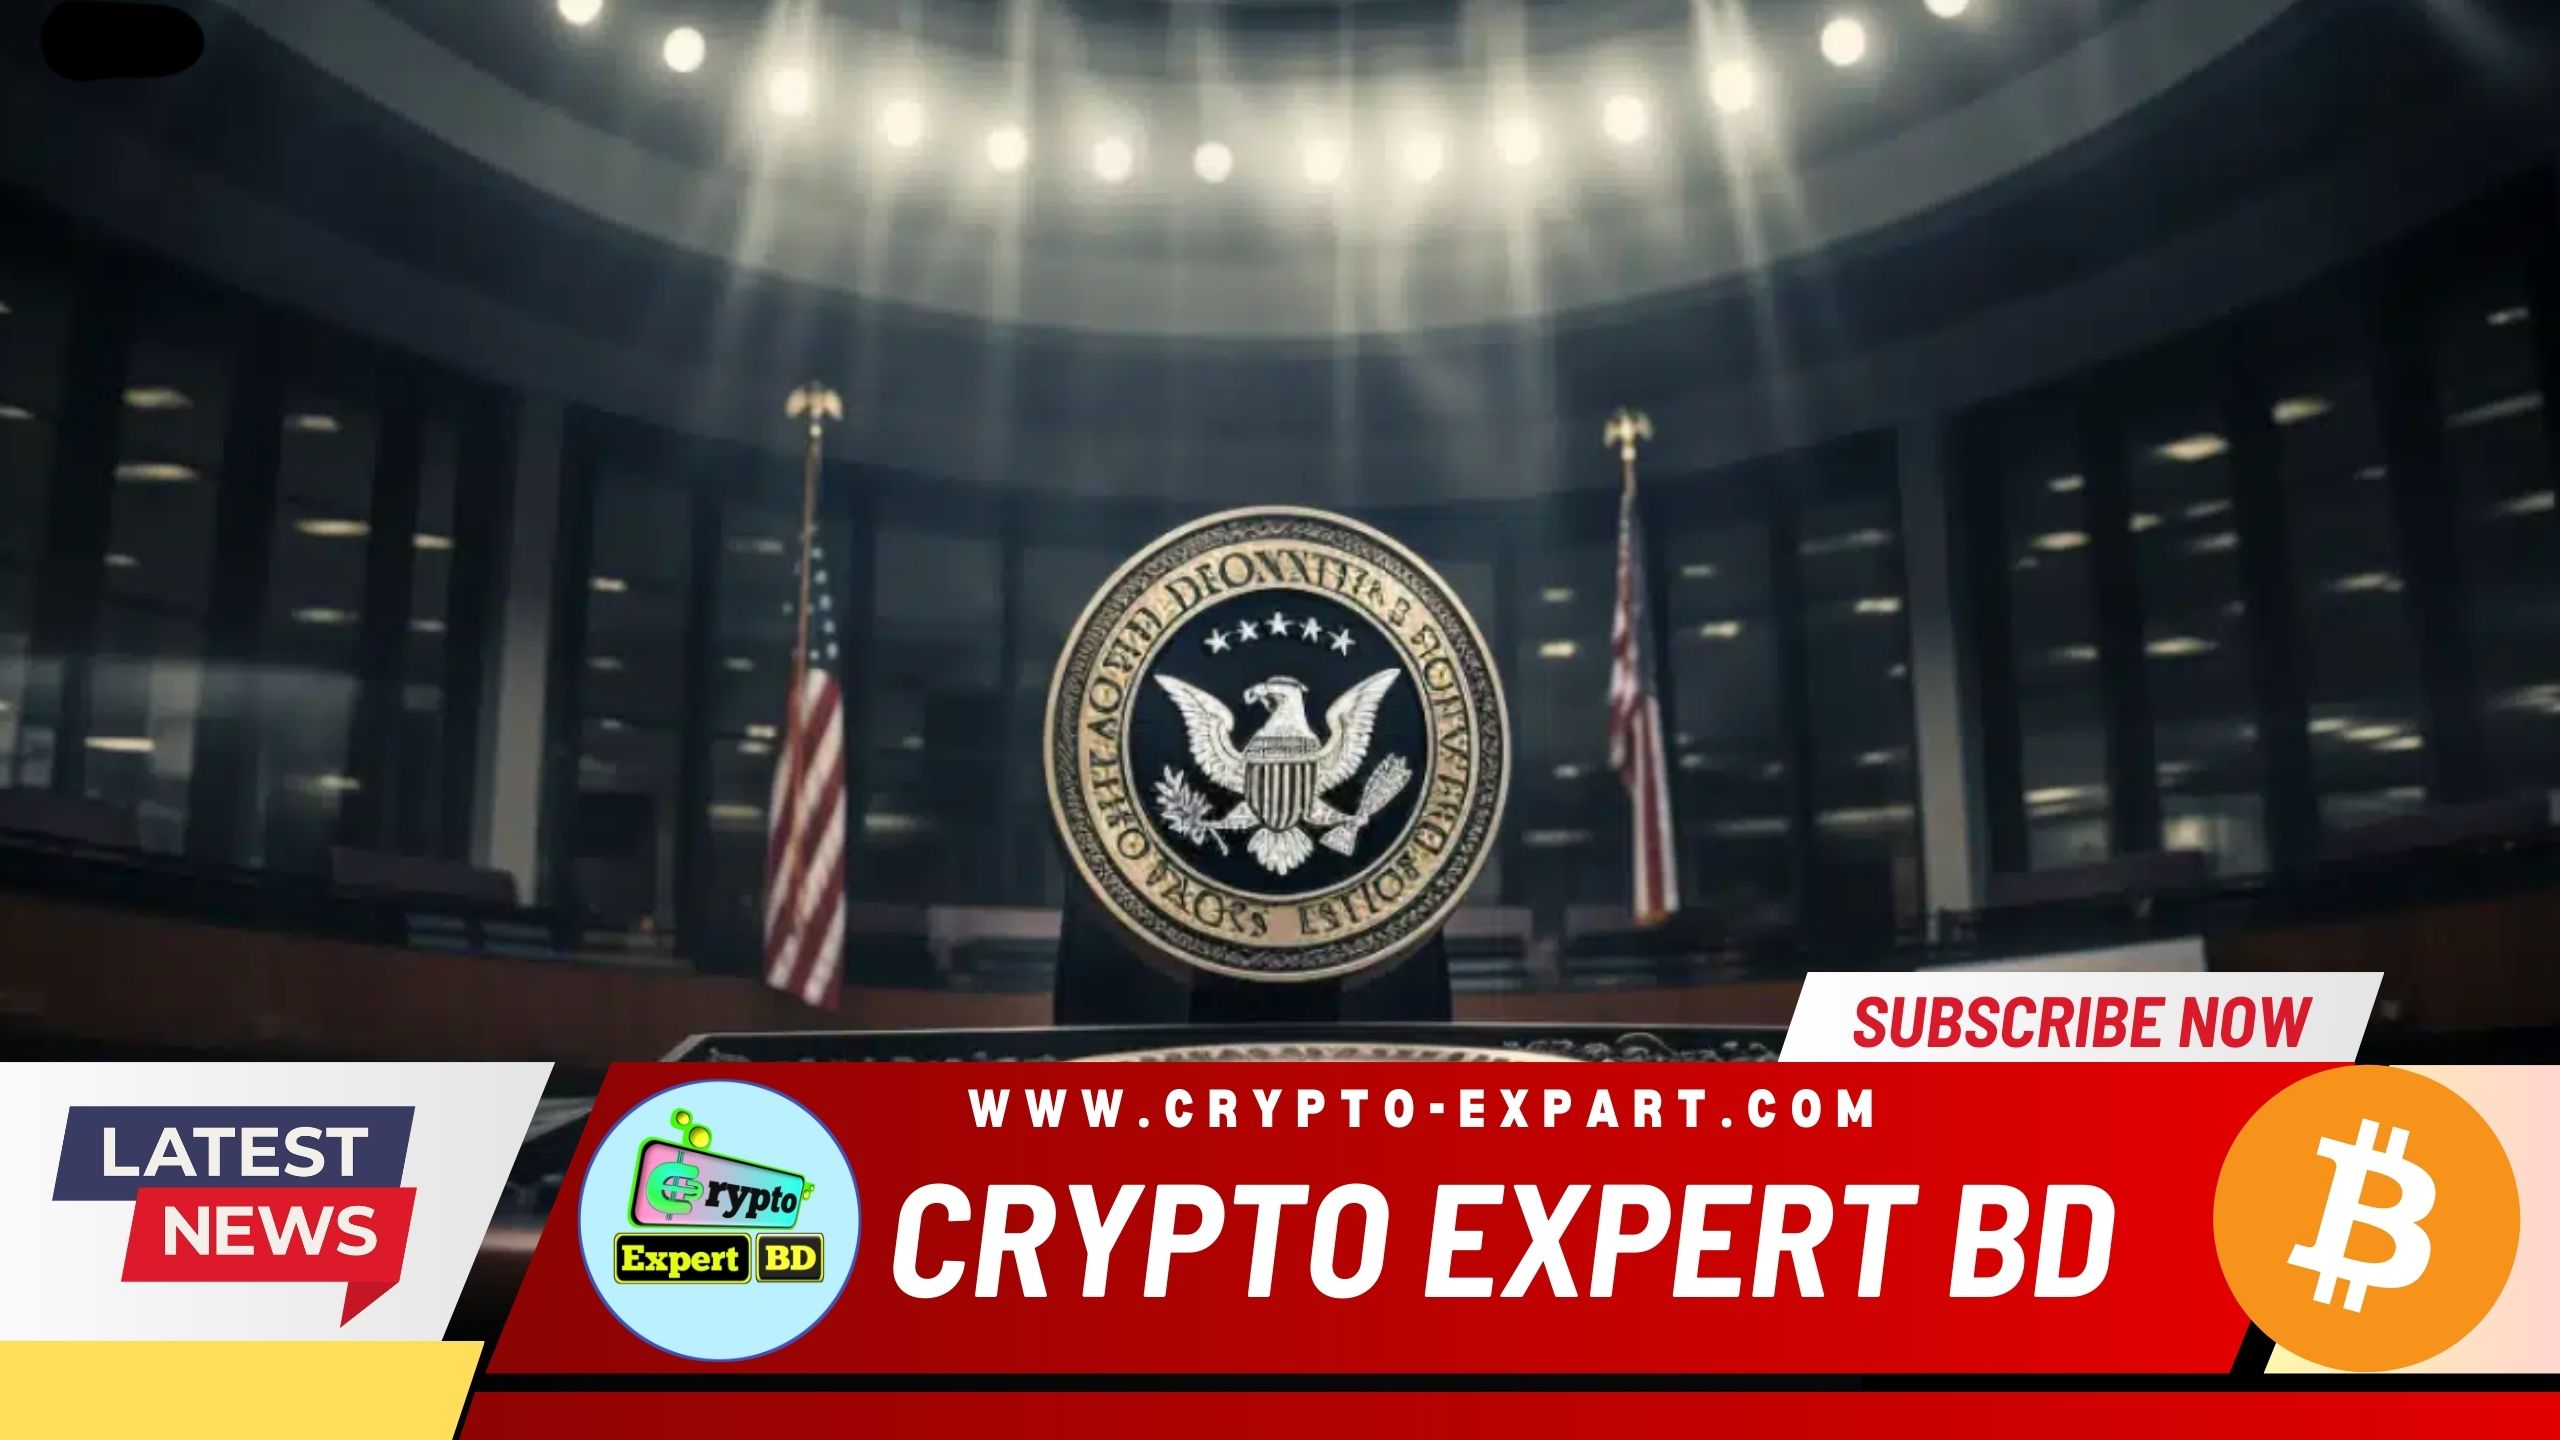 SEC’s Gurbir Grewal Calls Out Crypto Industry for Noncompliance